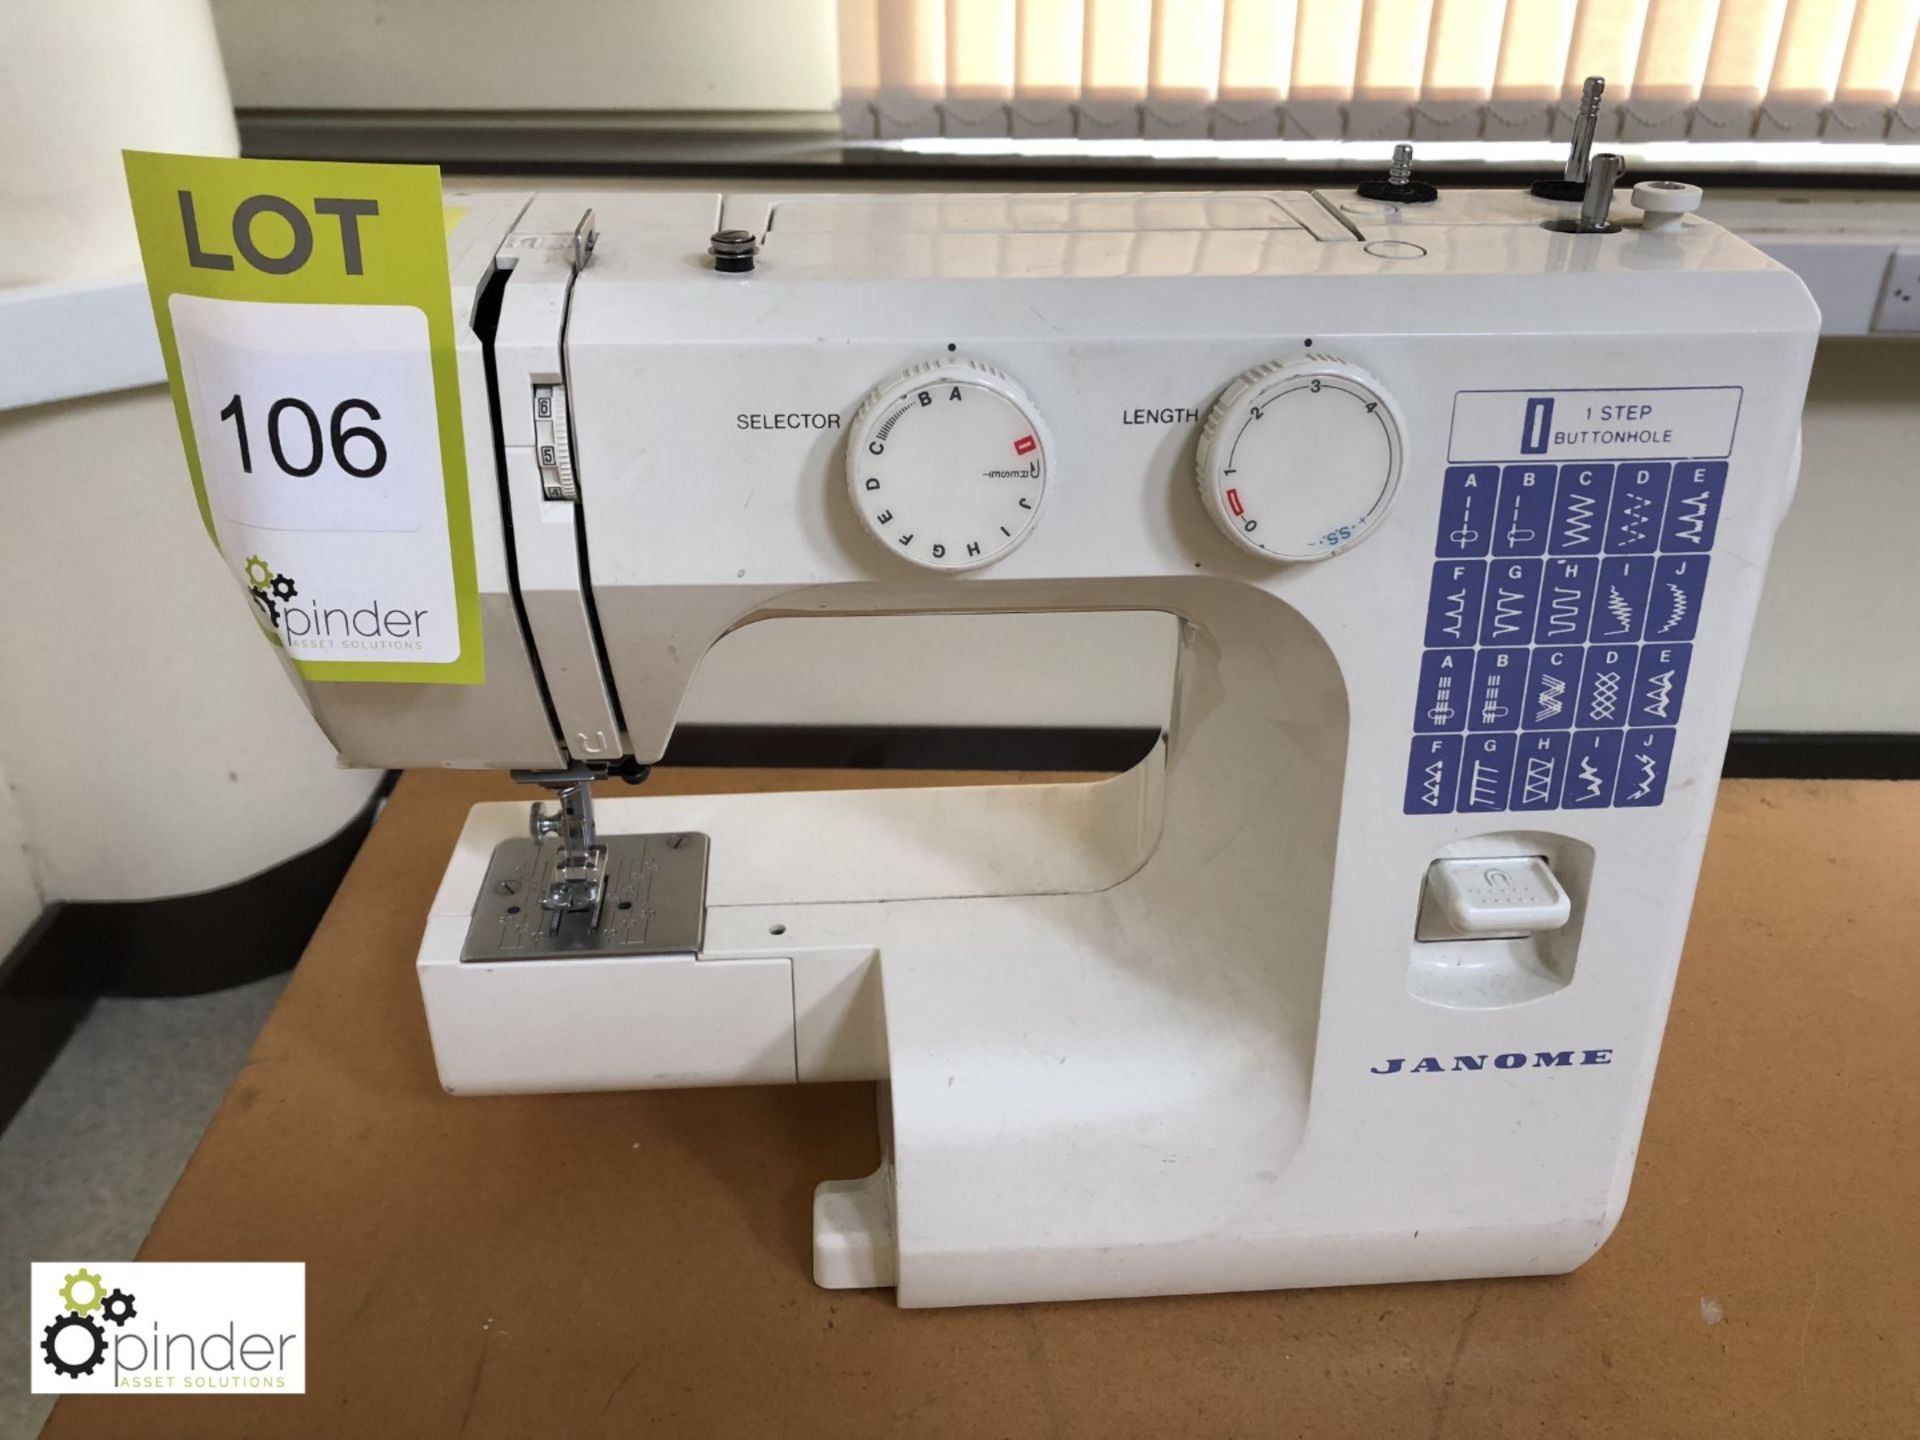 Janome Sewing Machine (located in W602, level 6)